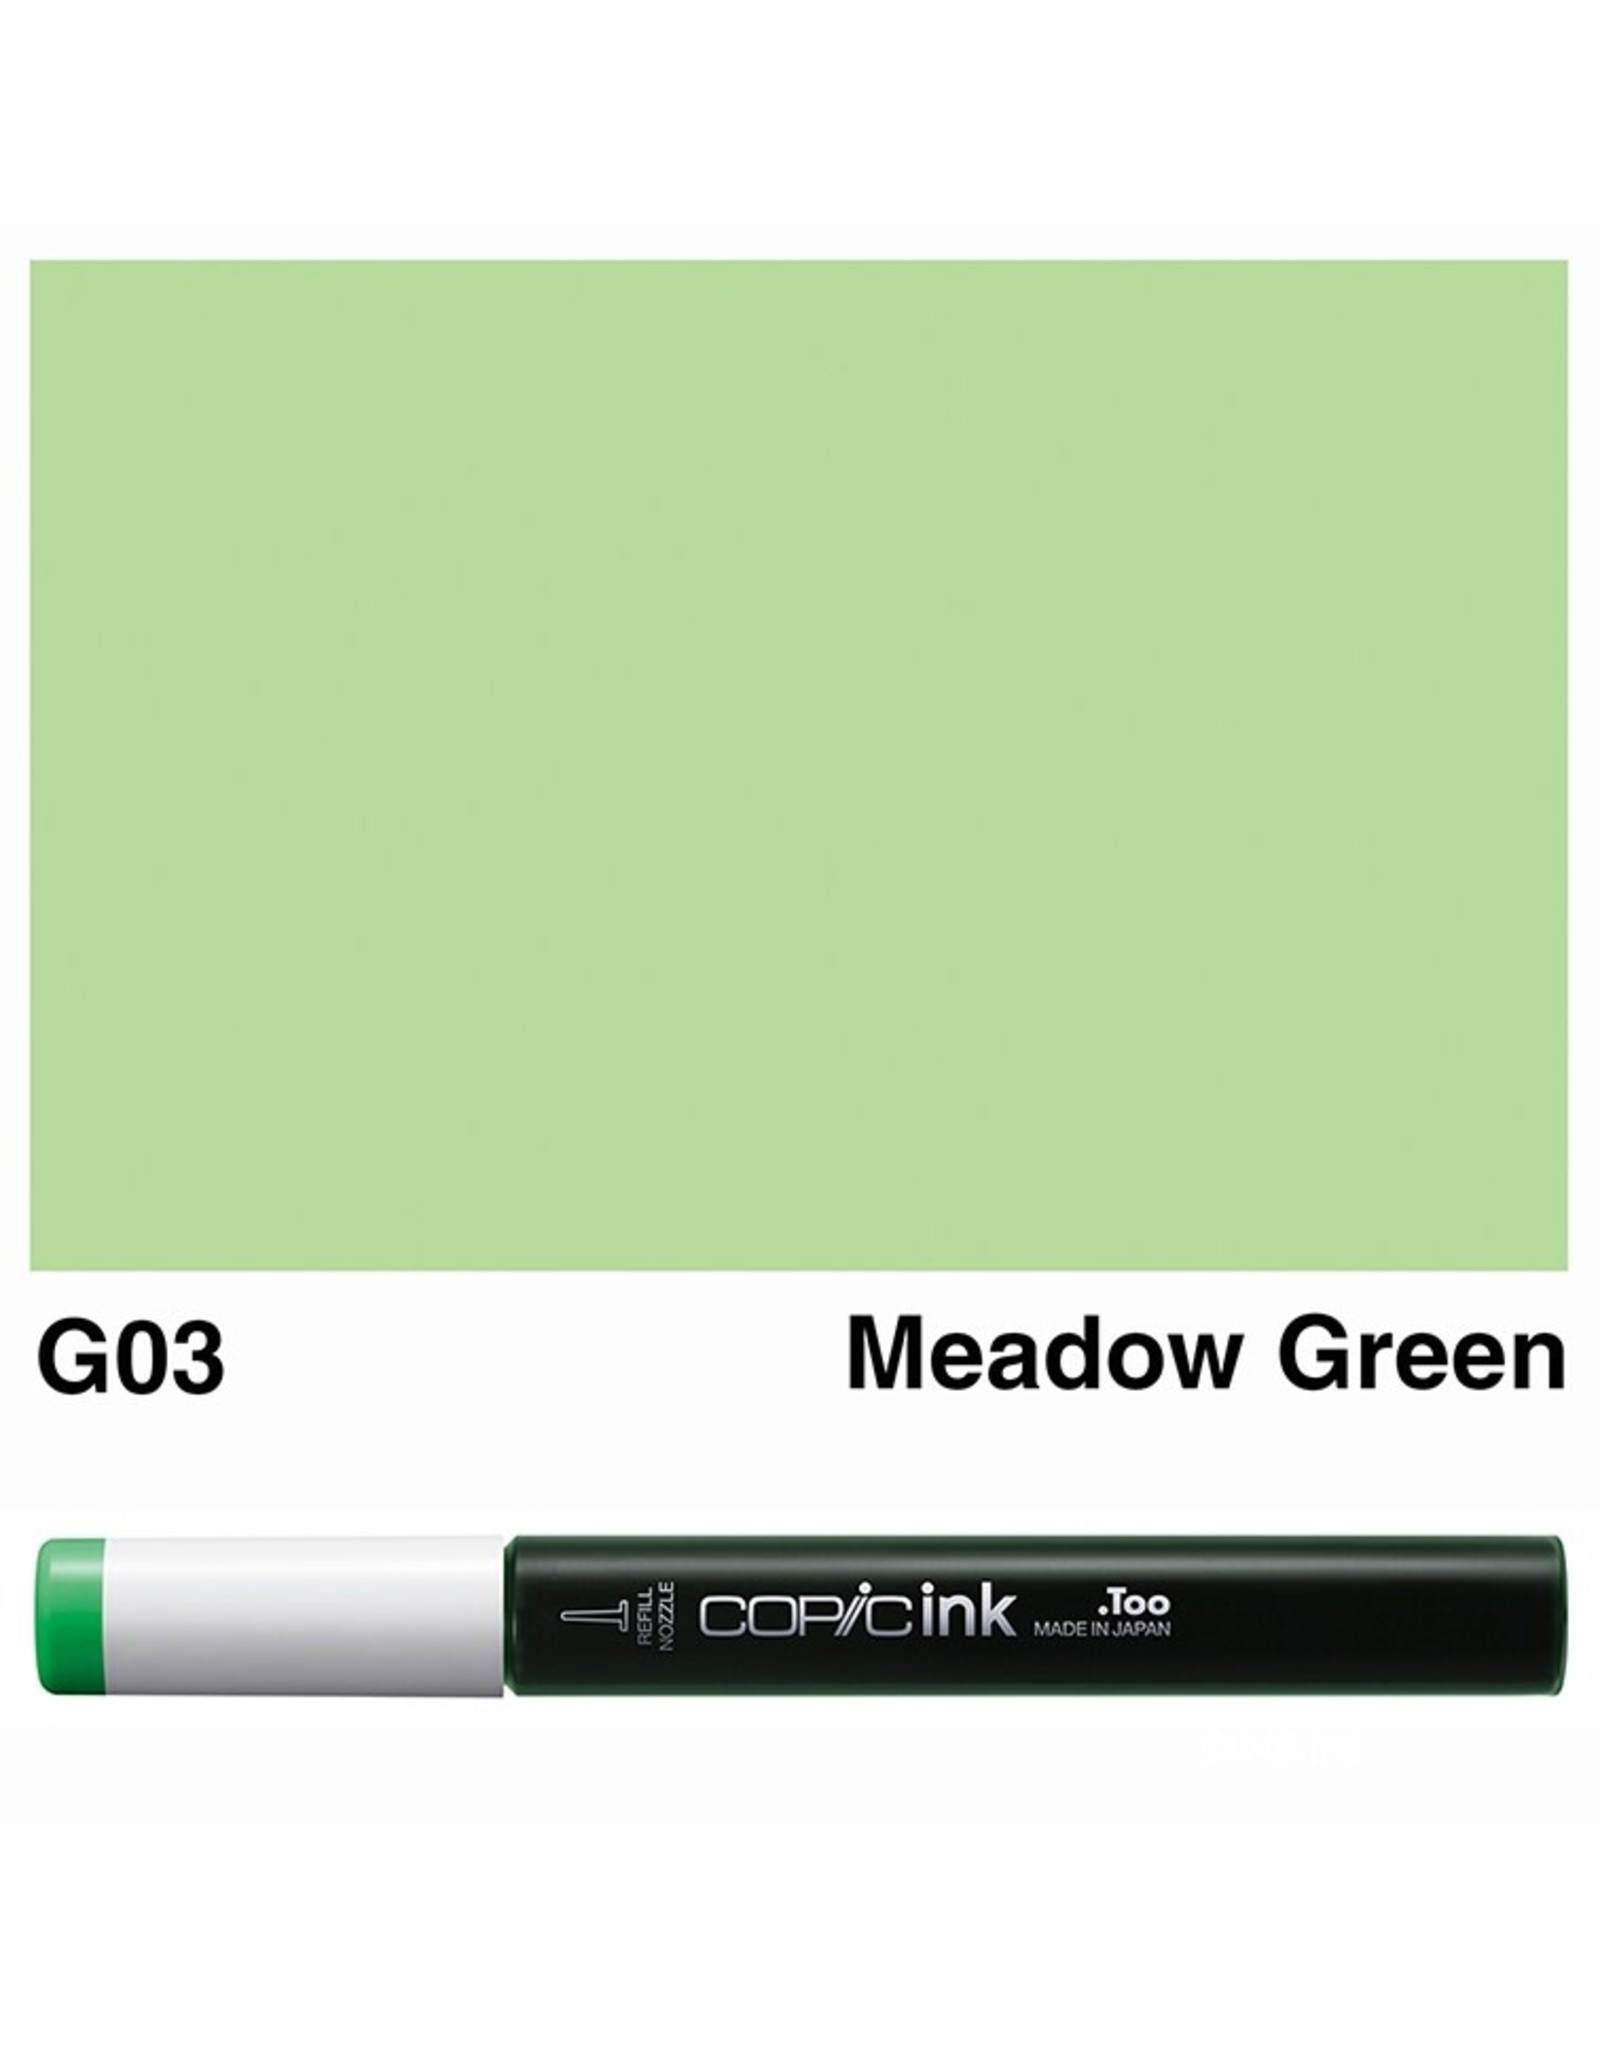 COPIC COPIC G03 MEADOW GREEN REFILL